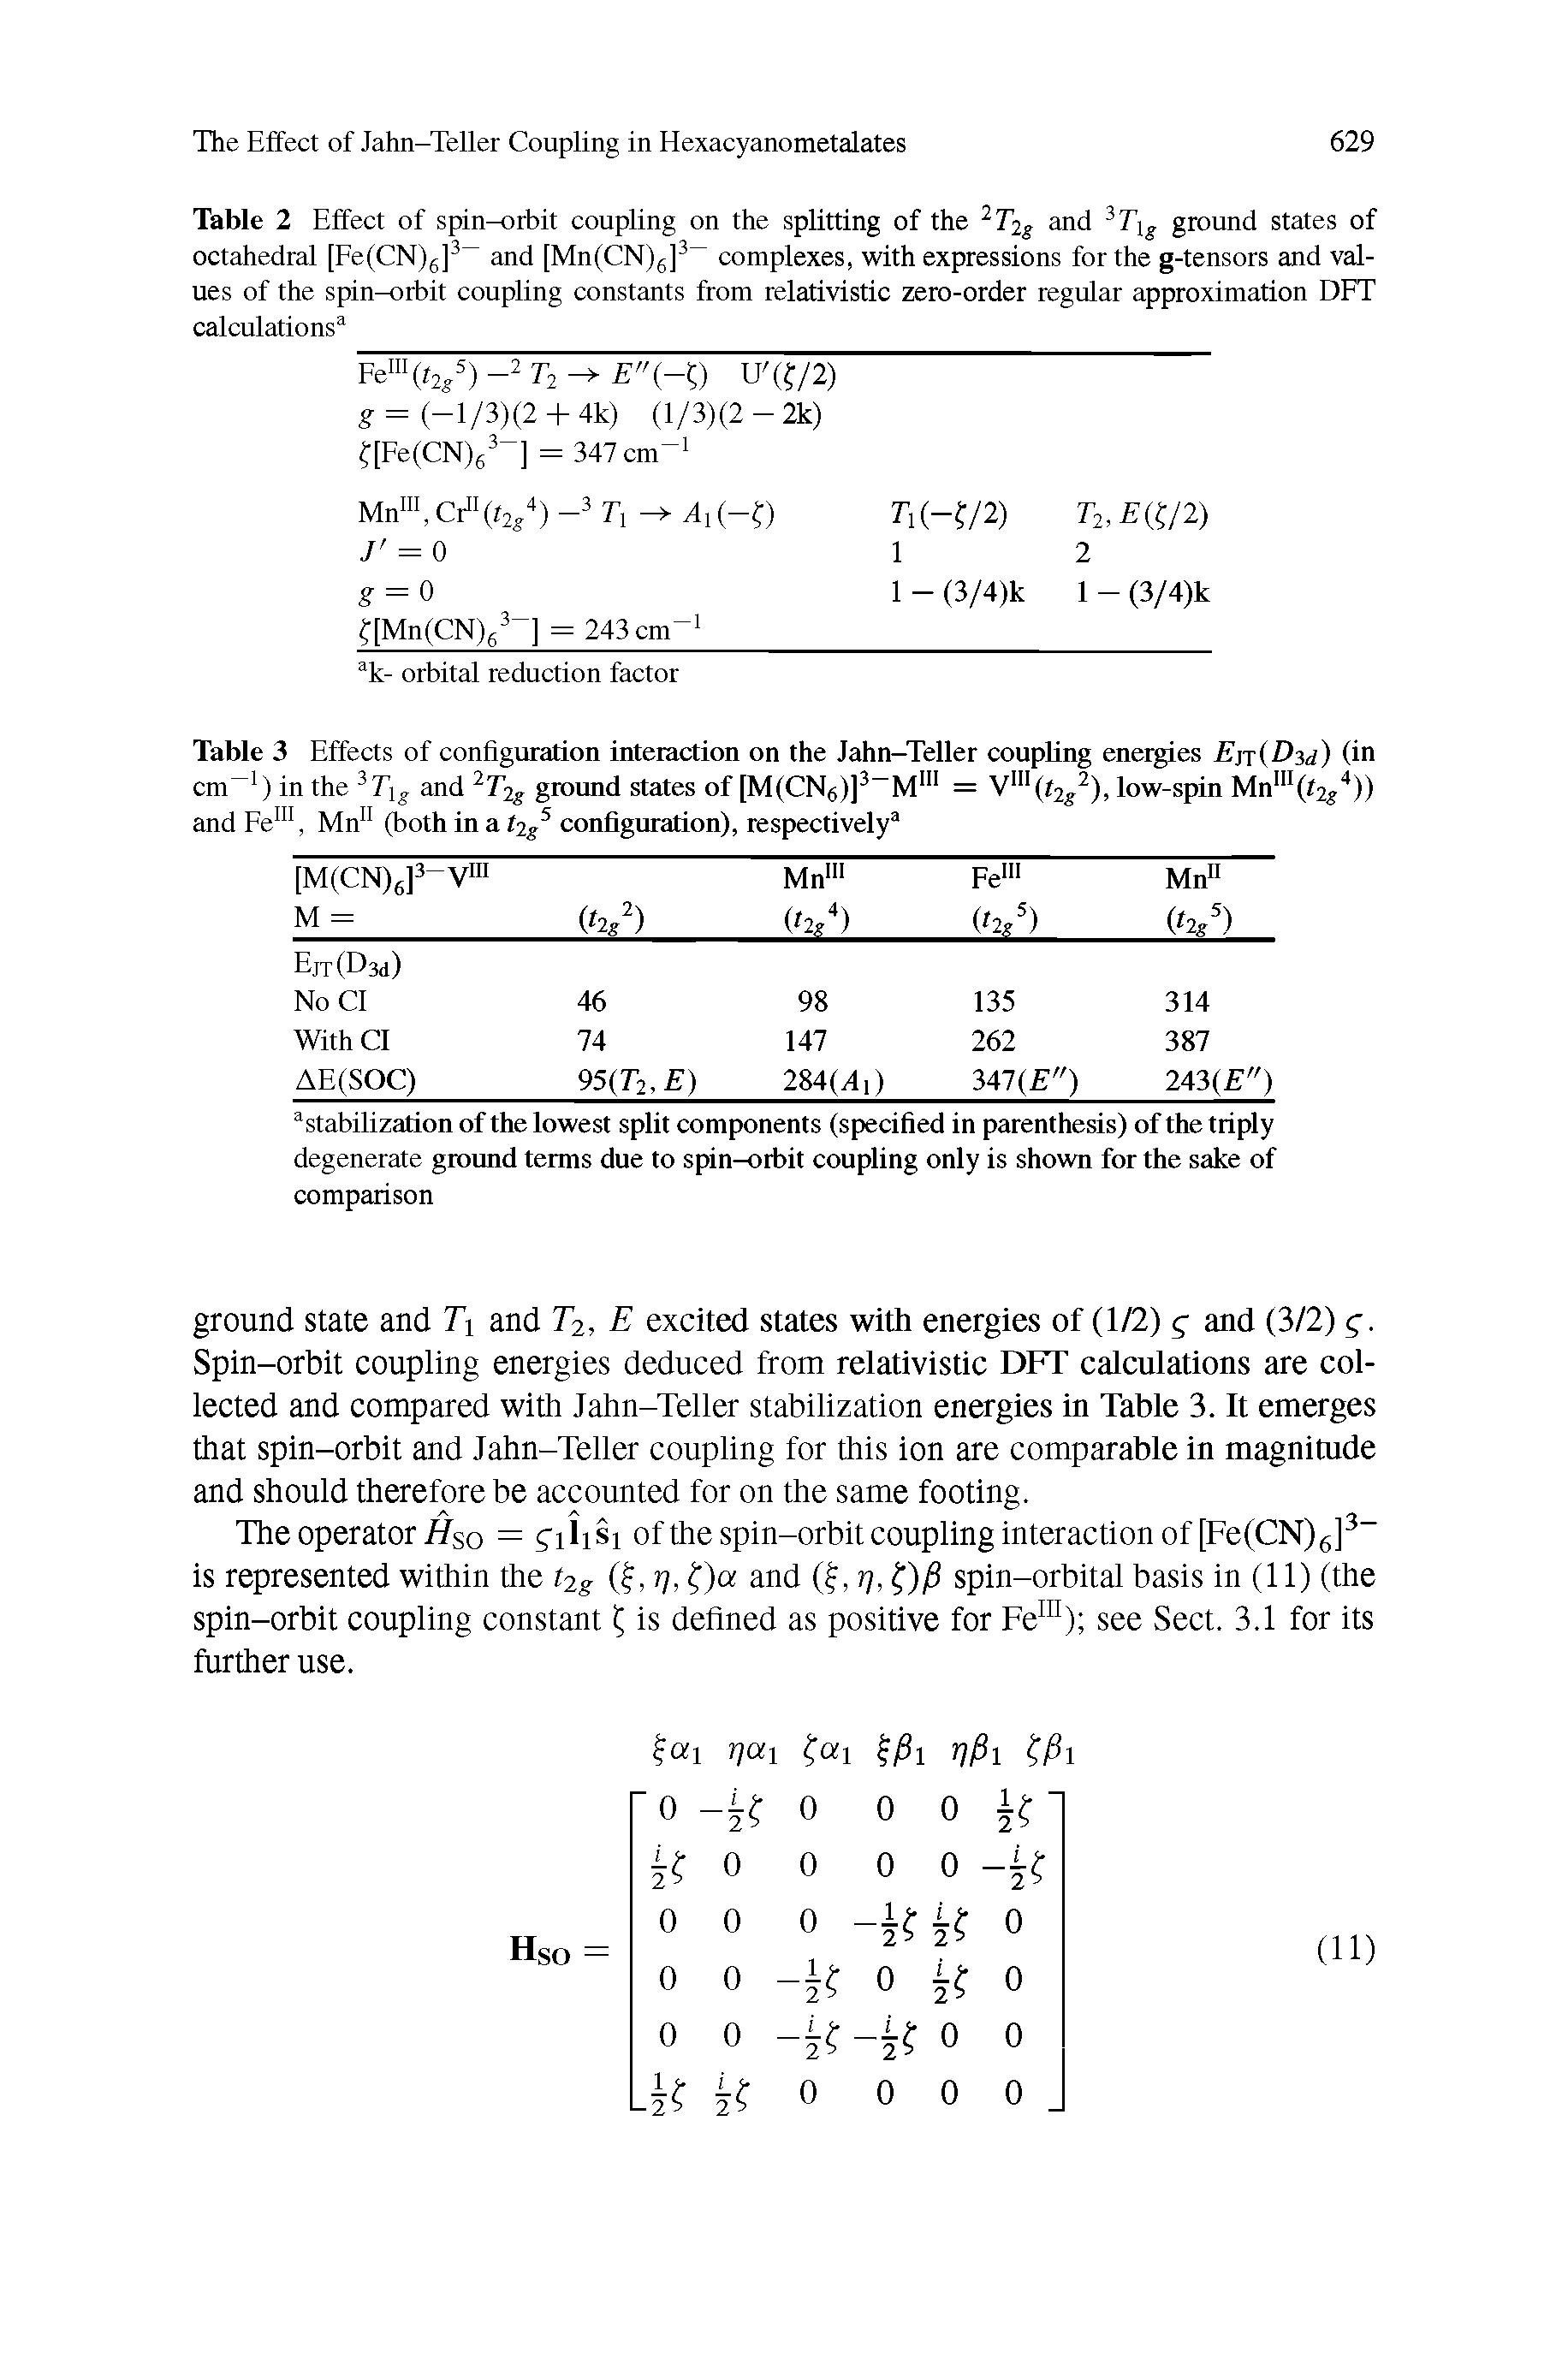 Table 2 Effect of spin-orbit coupling on the splitting of the T2g and Tig ground states of octahedral [Ee(CN)g] and [Mn(CN)g] complexes, with expressions for the g-tensors and values of the spin-orbit coupling constants from relativistic zero-order regular approximation DPT calculations ...